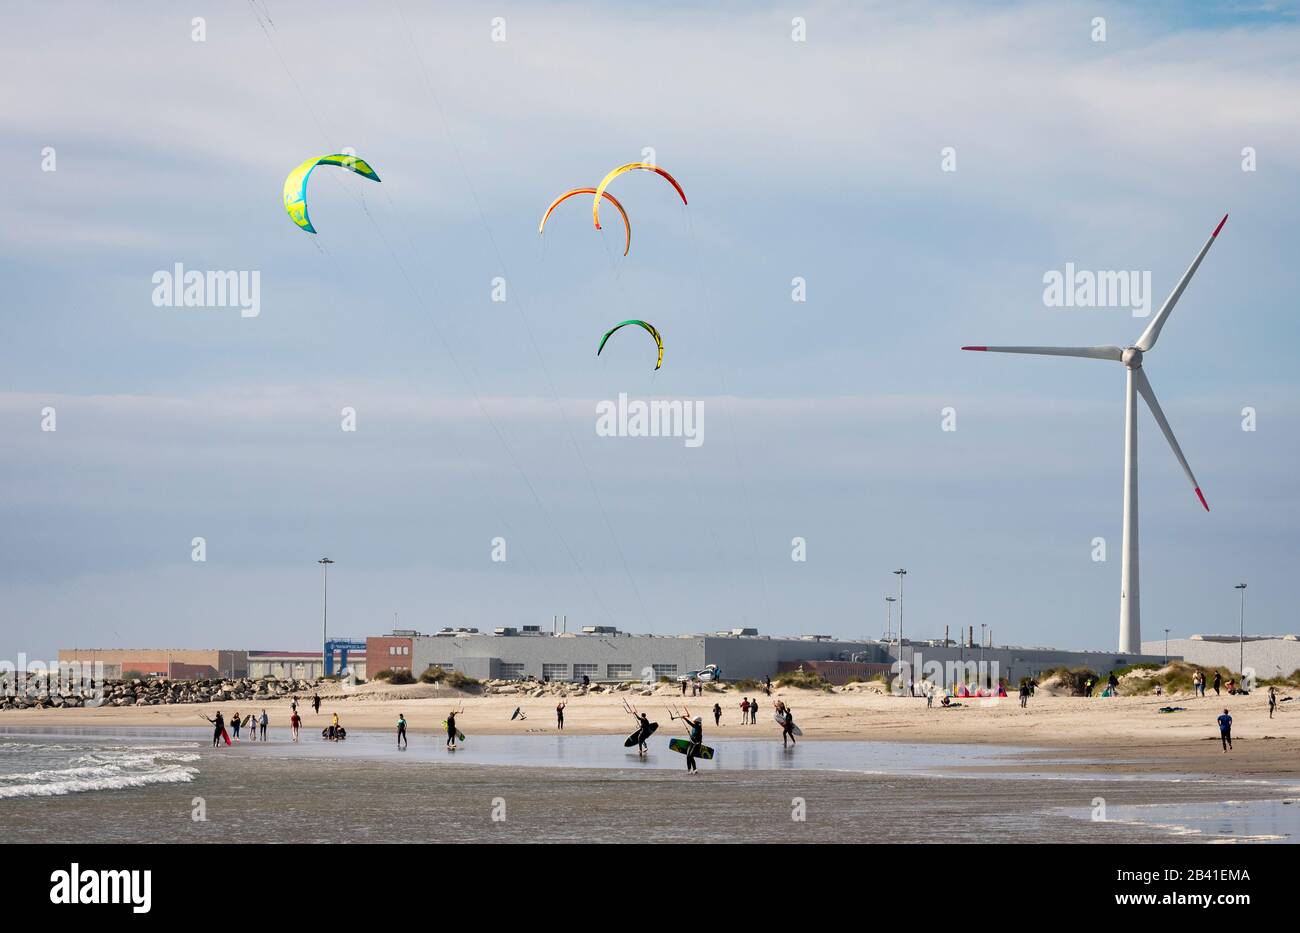 People practicing kitesurf at the beach in Portugal Stock Photo